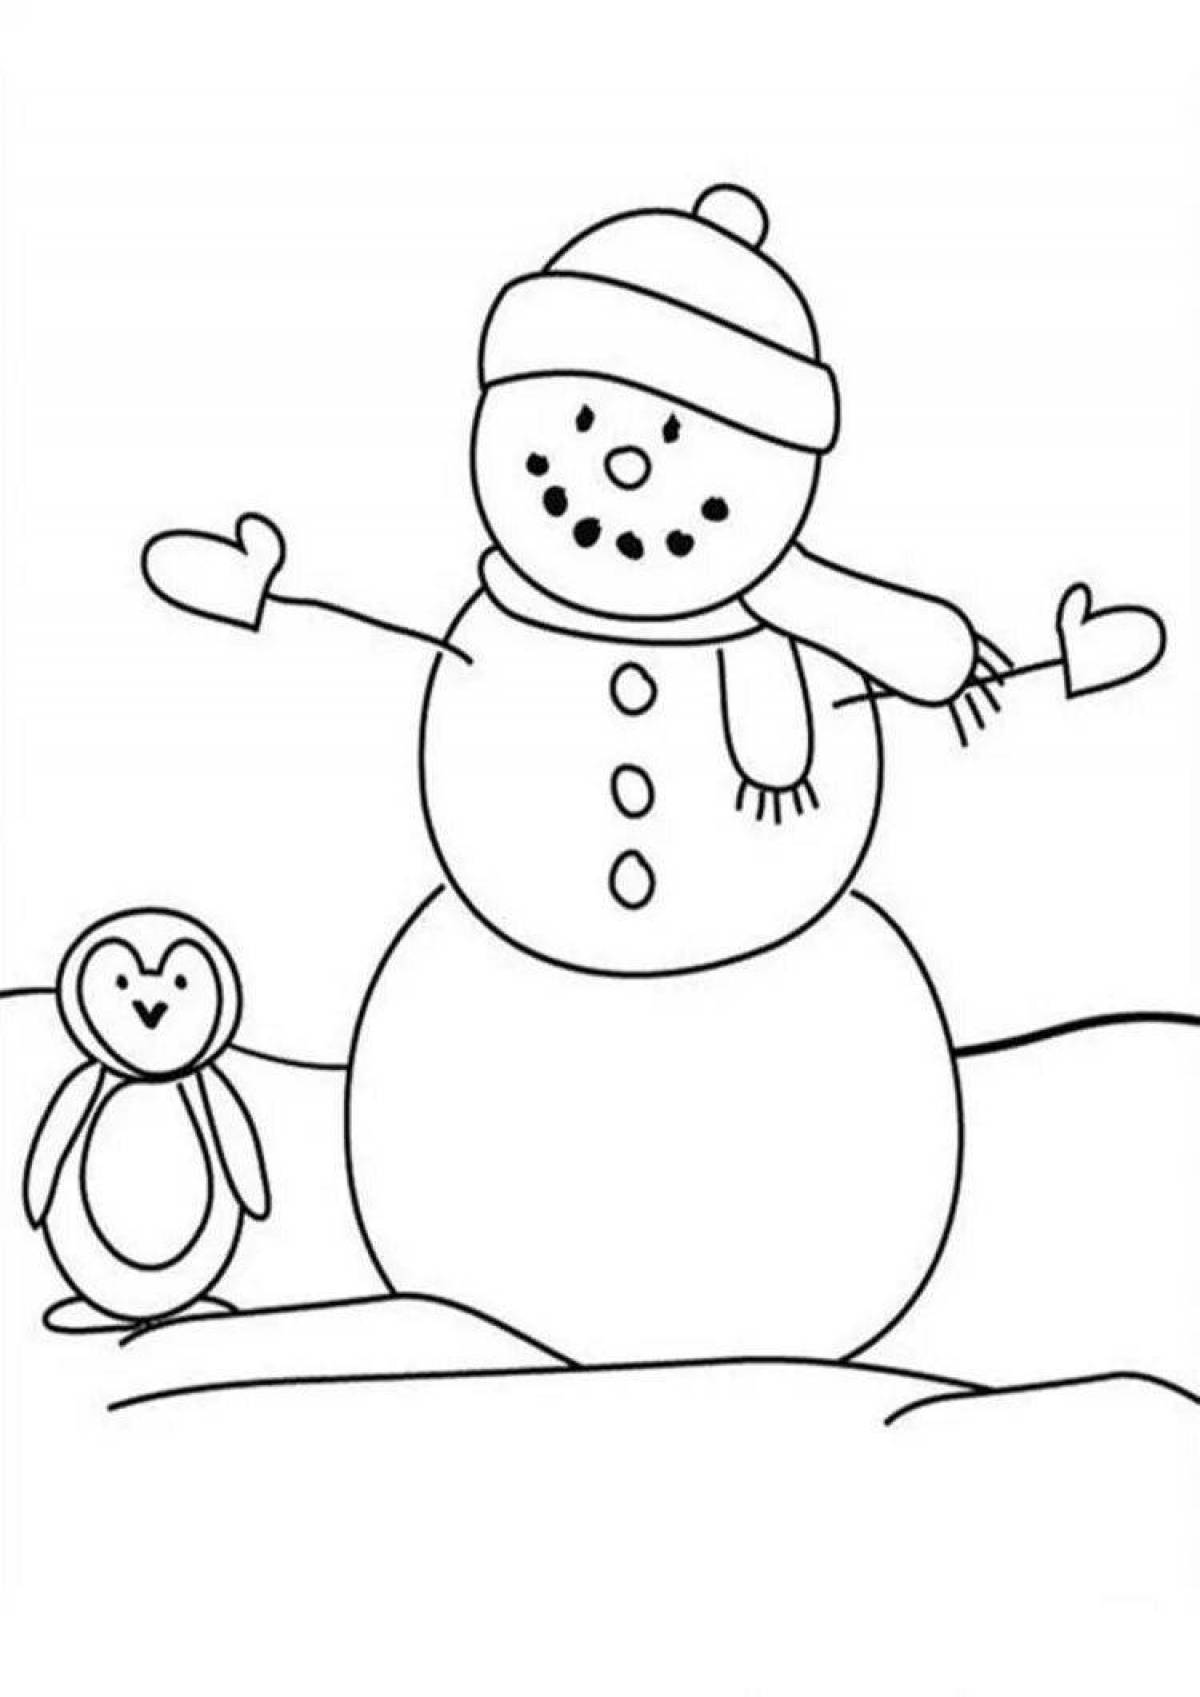 Holiday snowman coloring book for kids